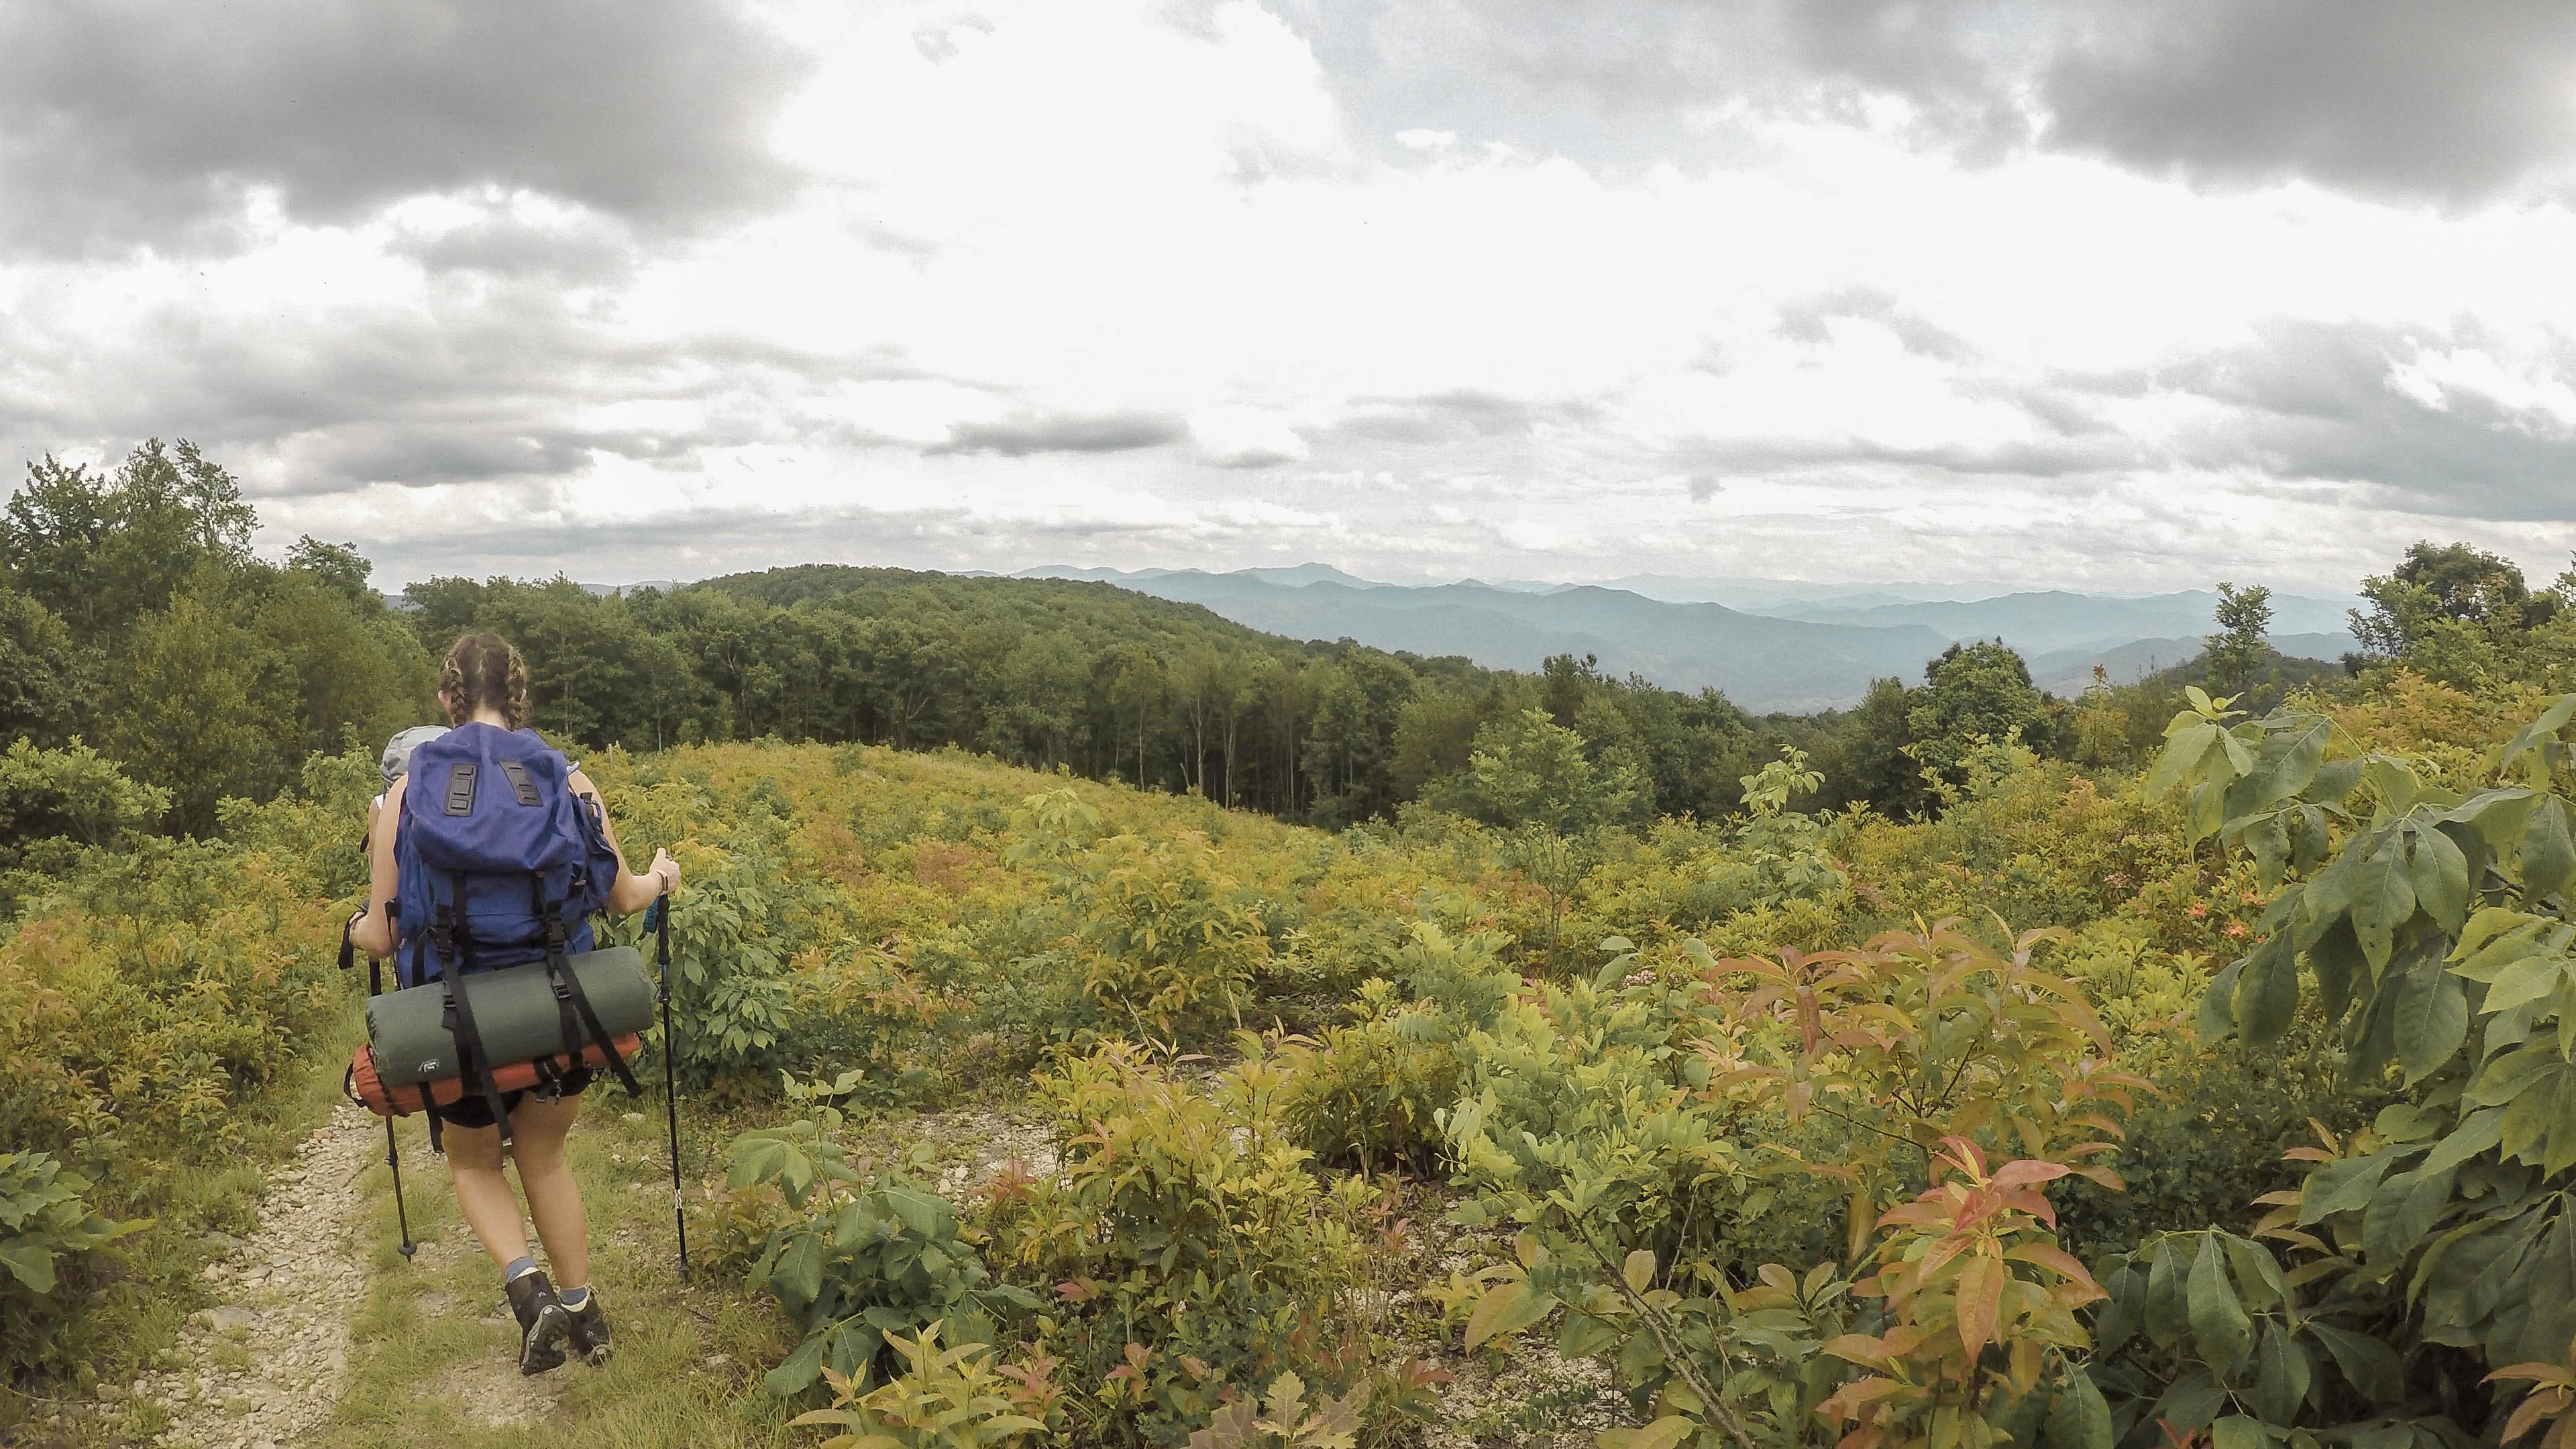 Two Day 30 Mile Backpacking Trip on the Appalachian Trail